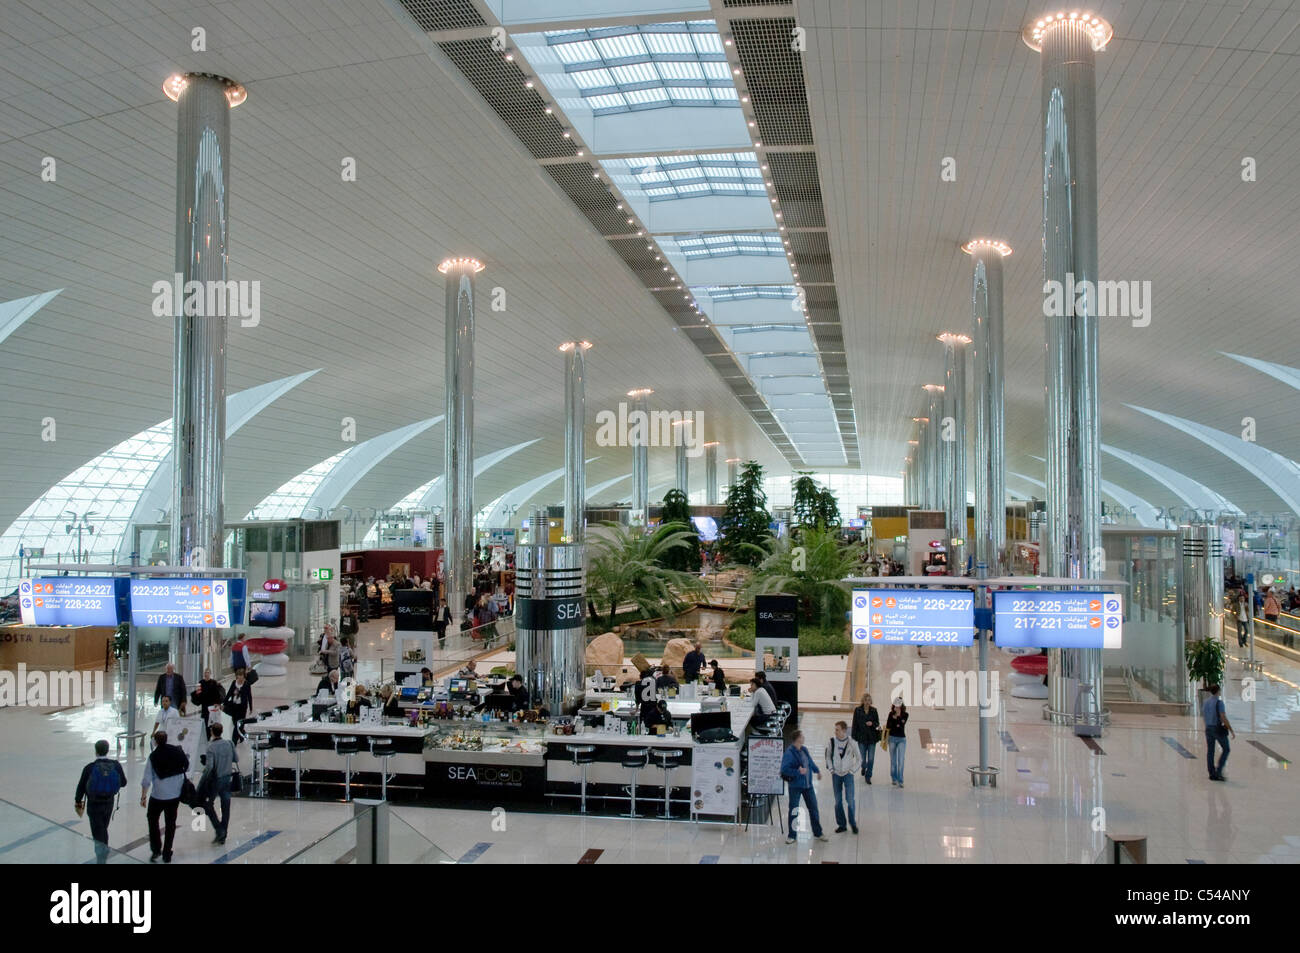 Dubai International Airport, New Terminal 3, exclusively for Emirates Airlines, Dubai, United Arab Emirates, Middle East Stock Photo